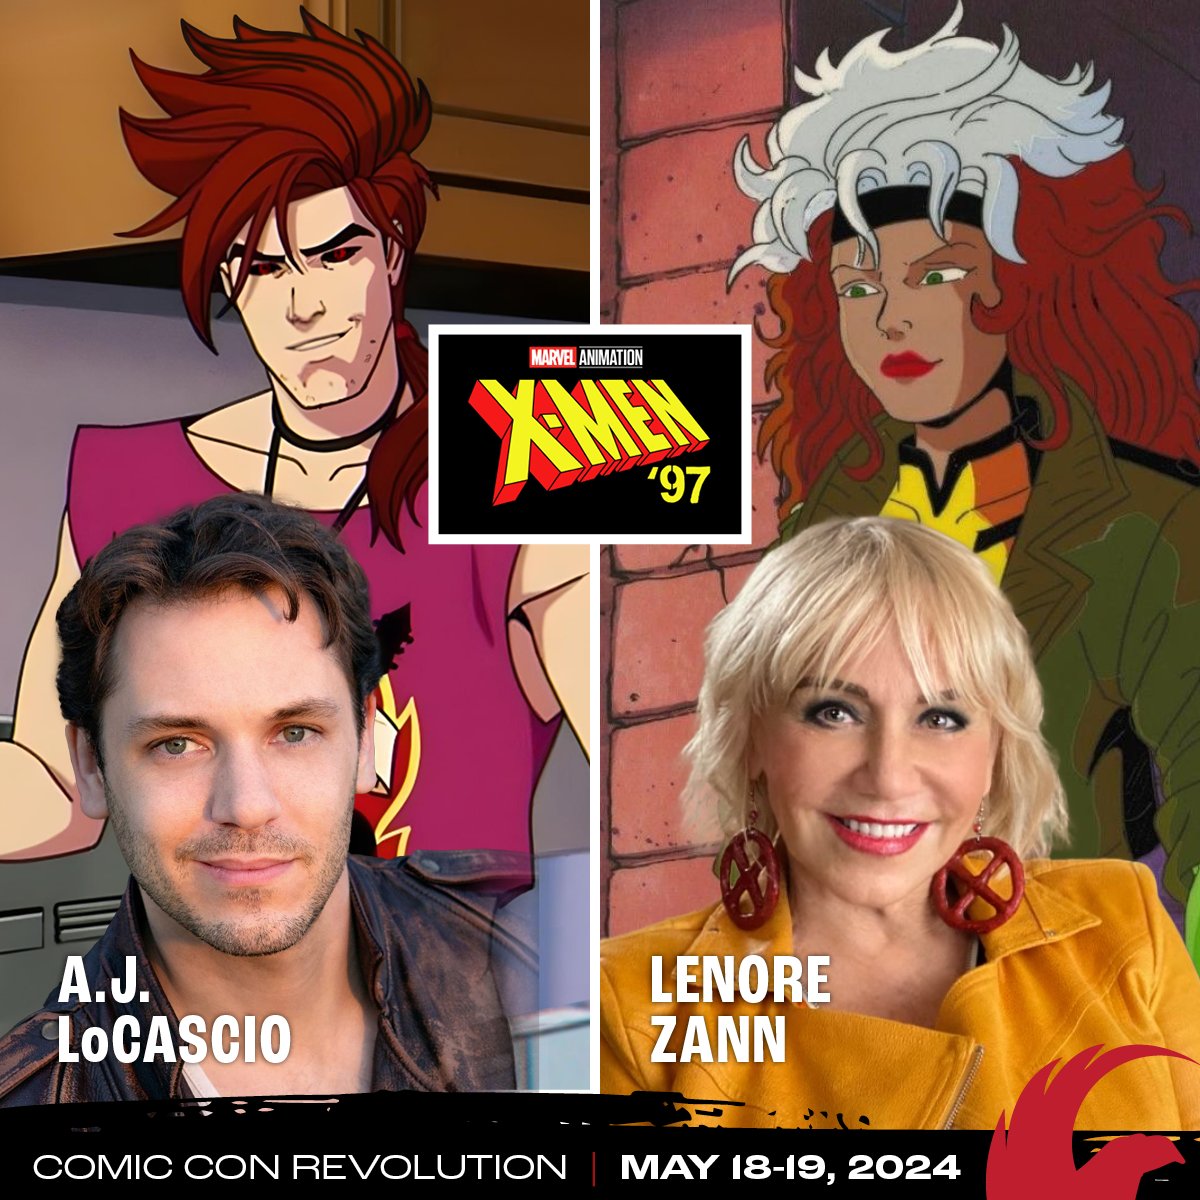 ❌ BIG NEWS! #XMen97's @ZannLenore (#Rogue) & @AJLoCascio (#Gambit) are coming to #ComicConRevolution as well as taking part in the #XMen Animated Panel.

Tix: CCRTix.com
Photo Ops & Autographs: CCRPhotos.com
#comiccon #inlandempire #ontariocalifornia